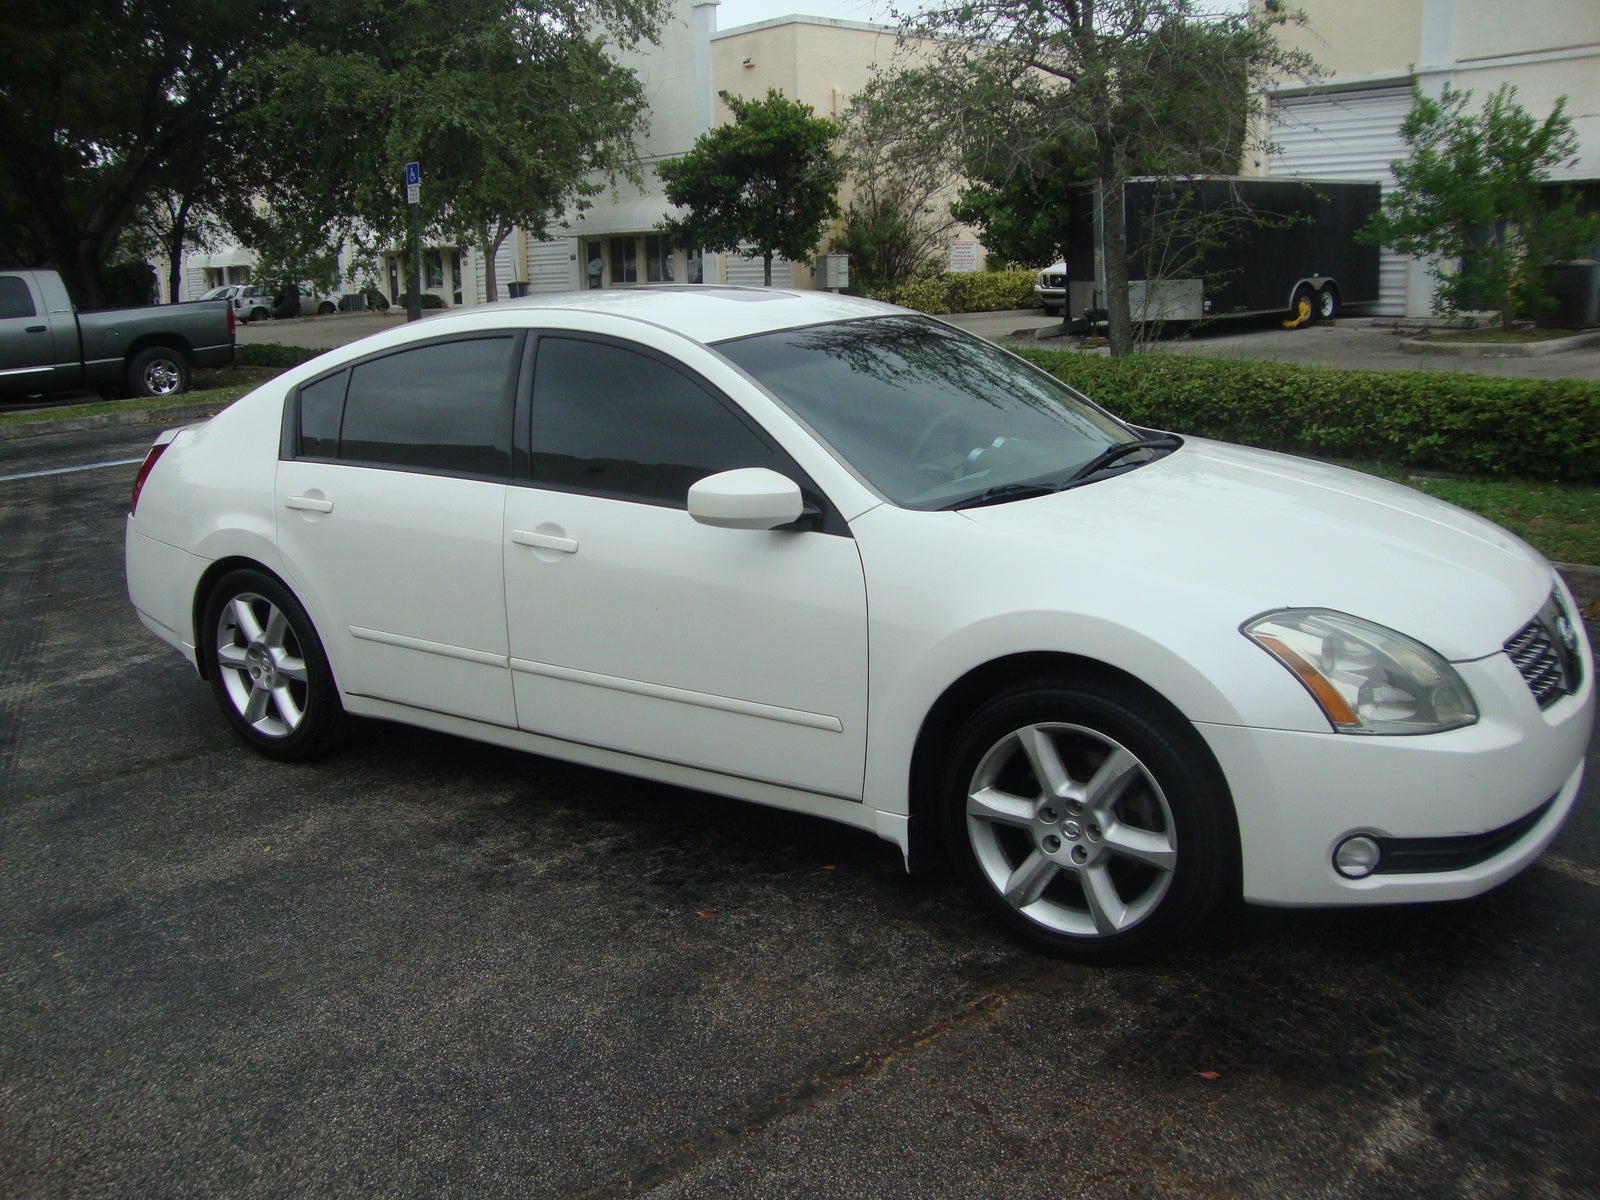 Is 2005 nissan maxima reliable #5